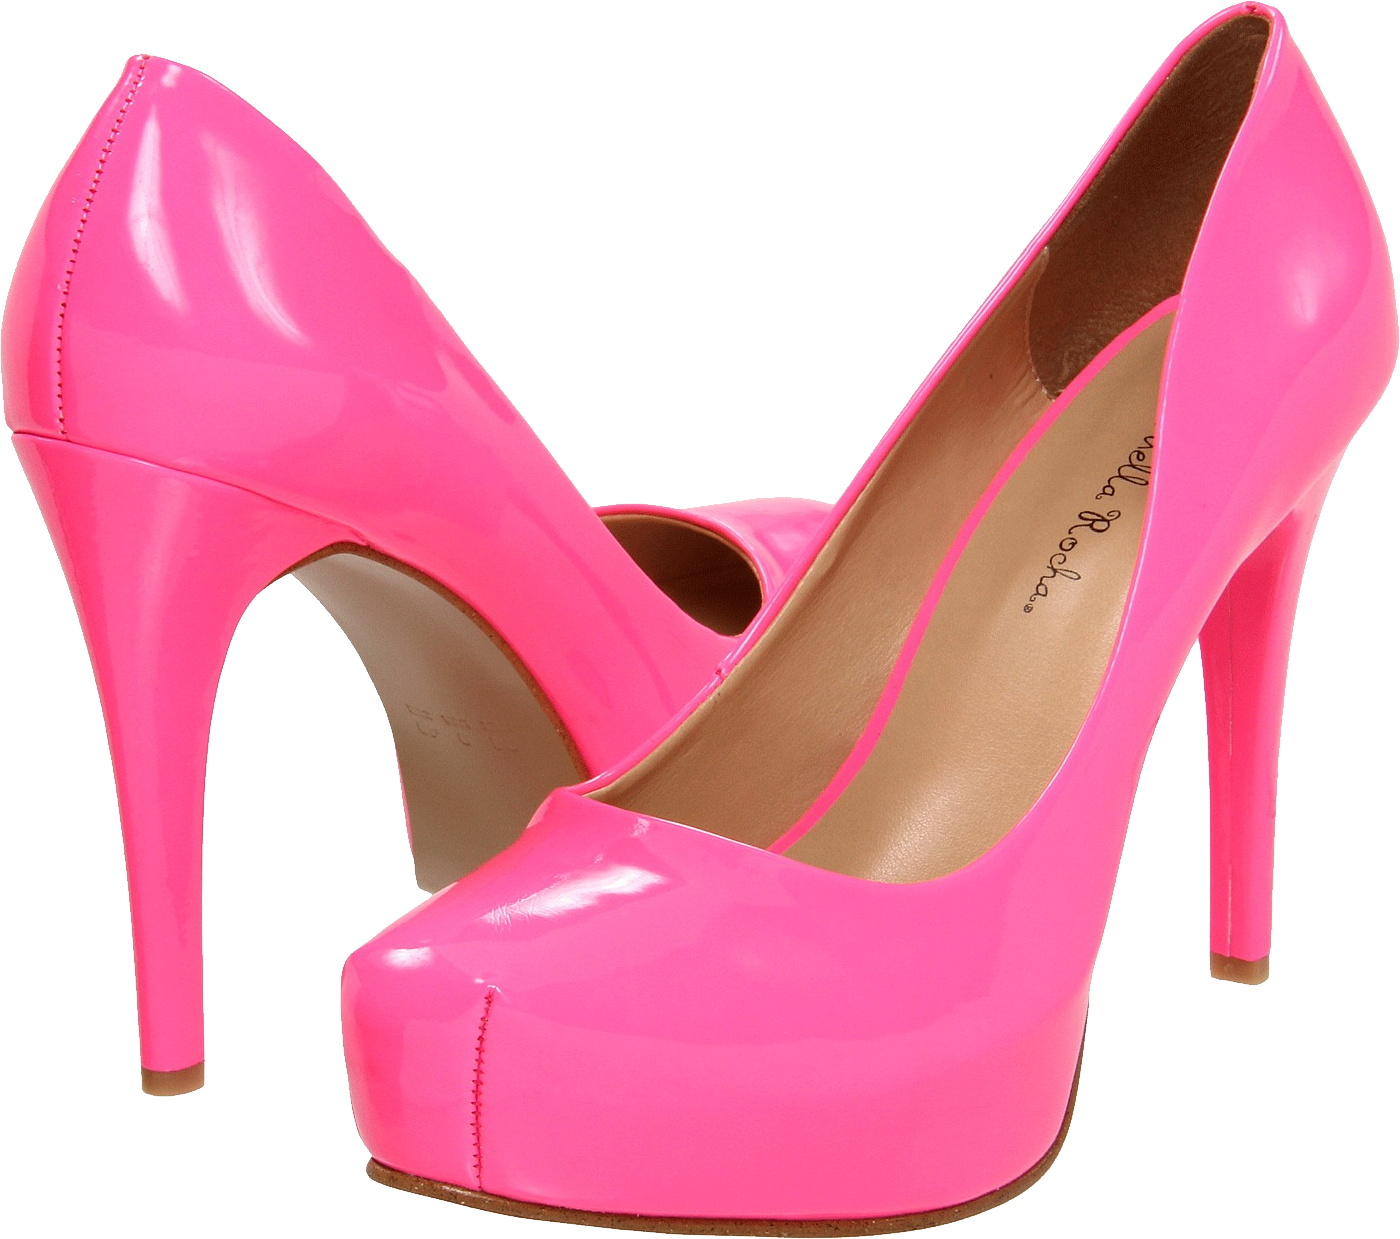 Heels PNG High-Quality Image